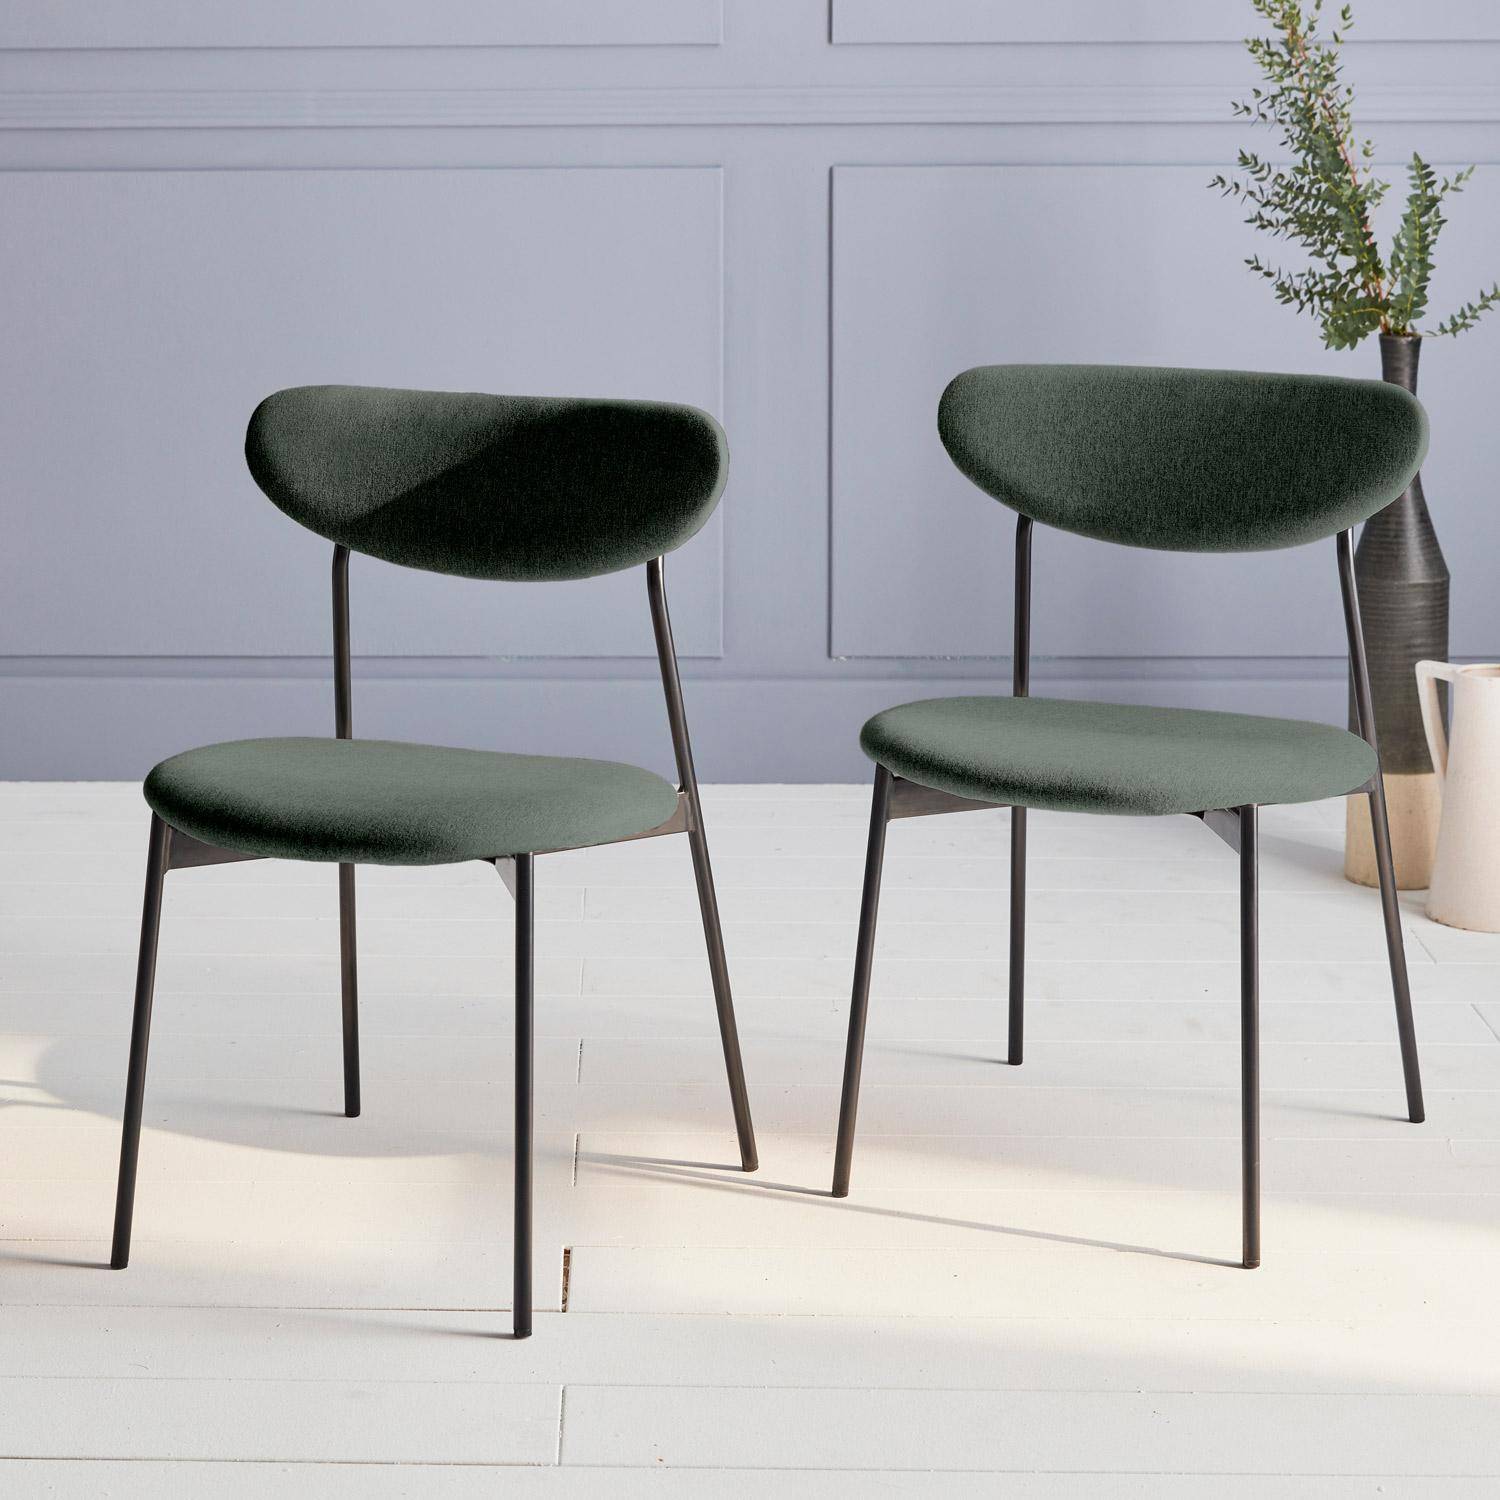 Set of 2 retro style dining chairs with steel legs - Arty - Green Photo1